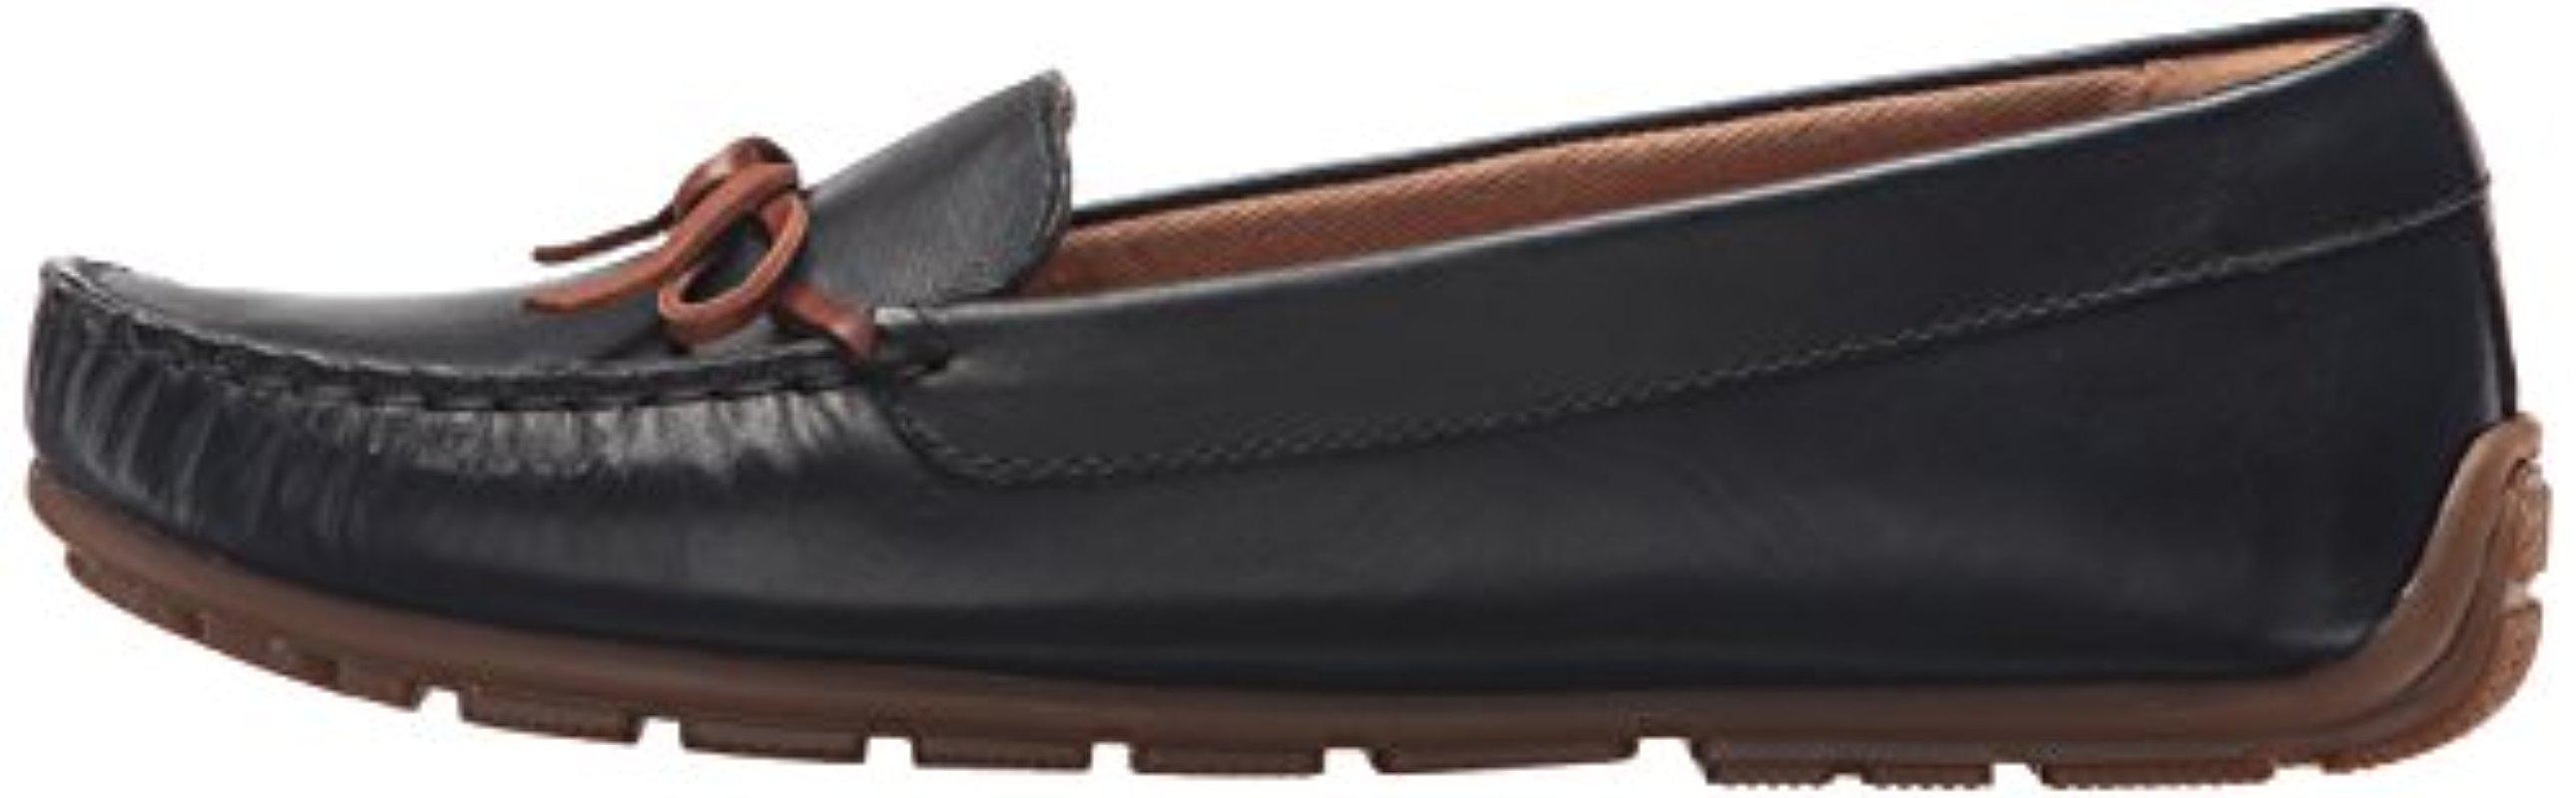 Clarks Dameo Swing Driving Style Loafer | Lyst